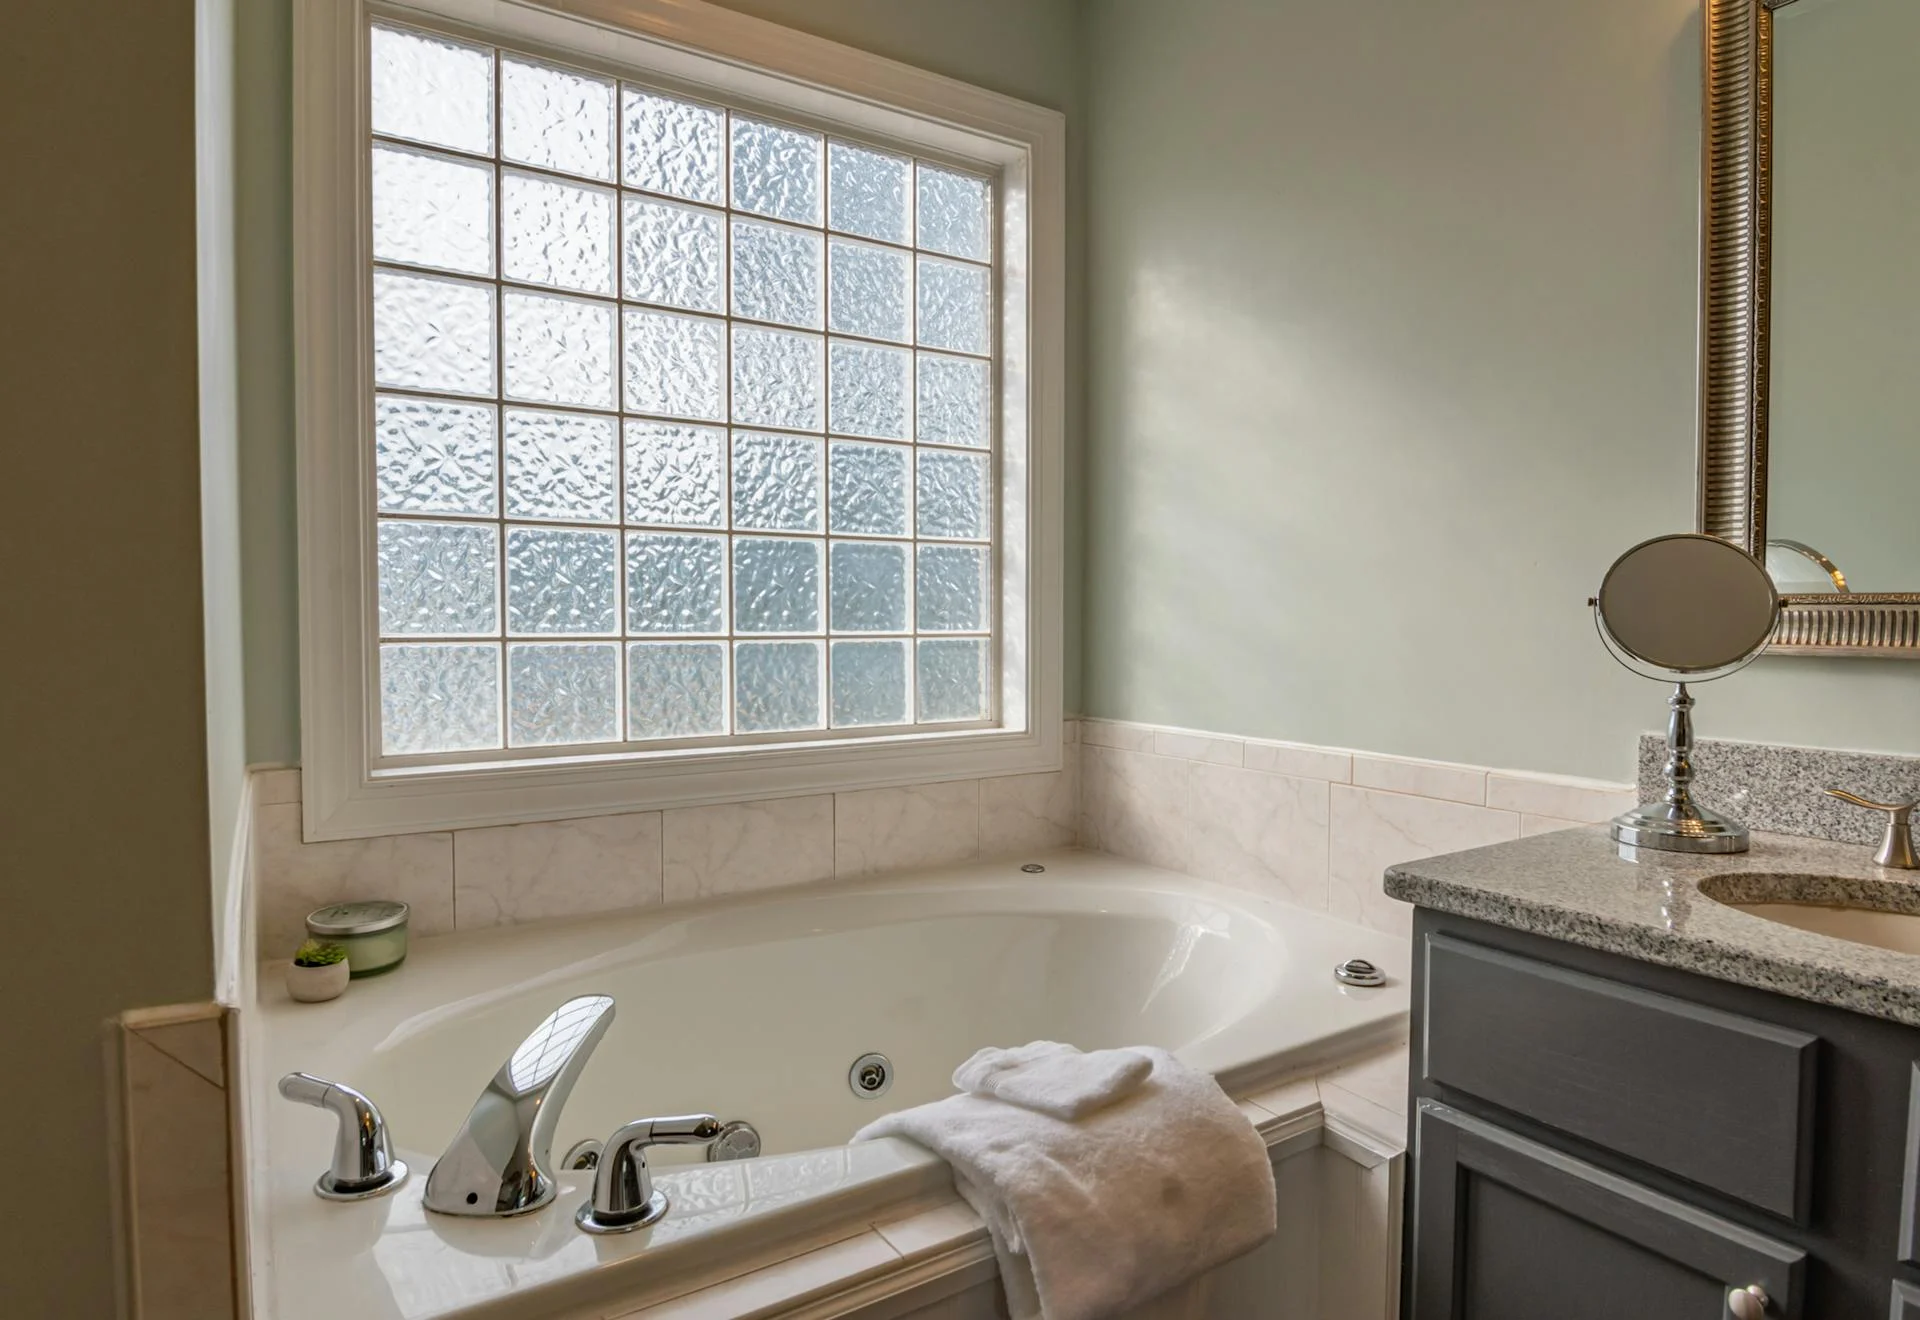 7 Signs Your Bathroom Needs a Modern Makeover